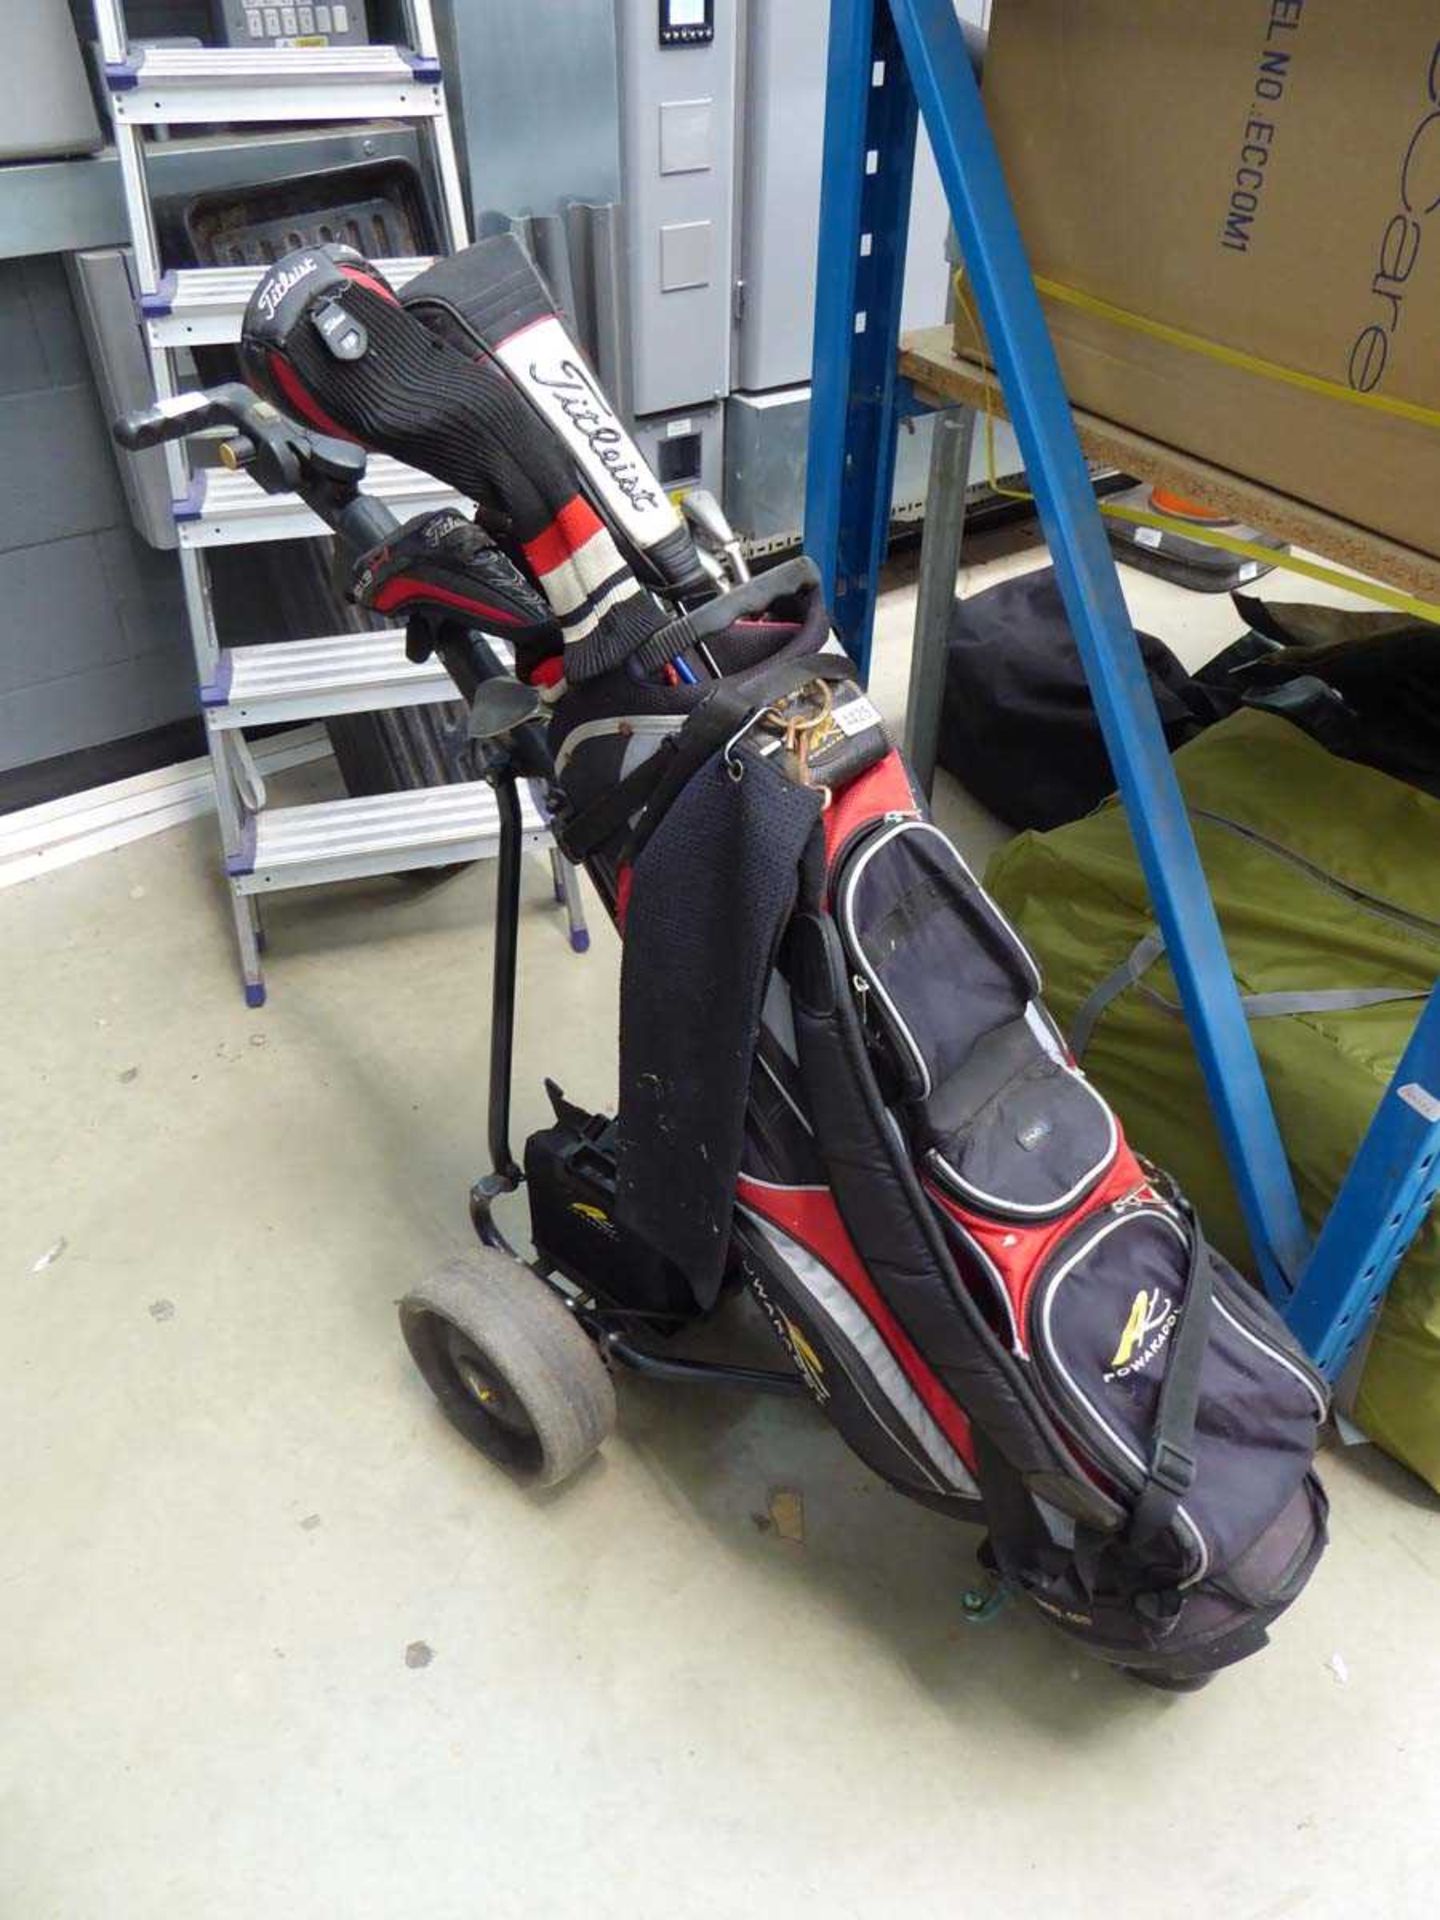 PowerCaddy electric golf trolley, complete with bag and assorted King and Titleist golf clubs